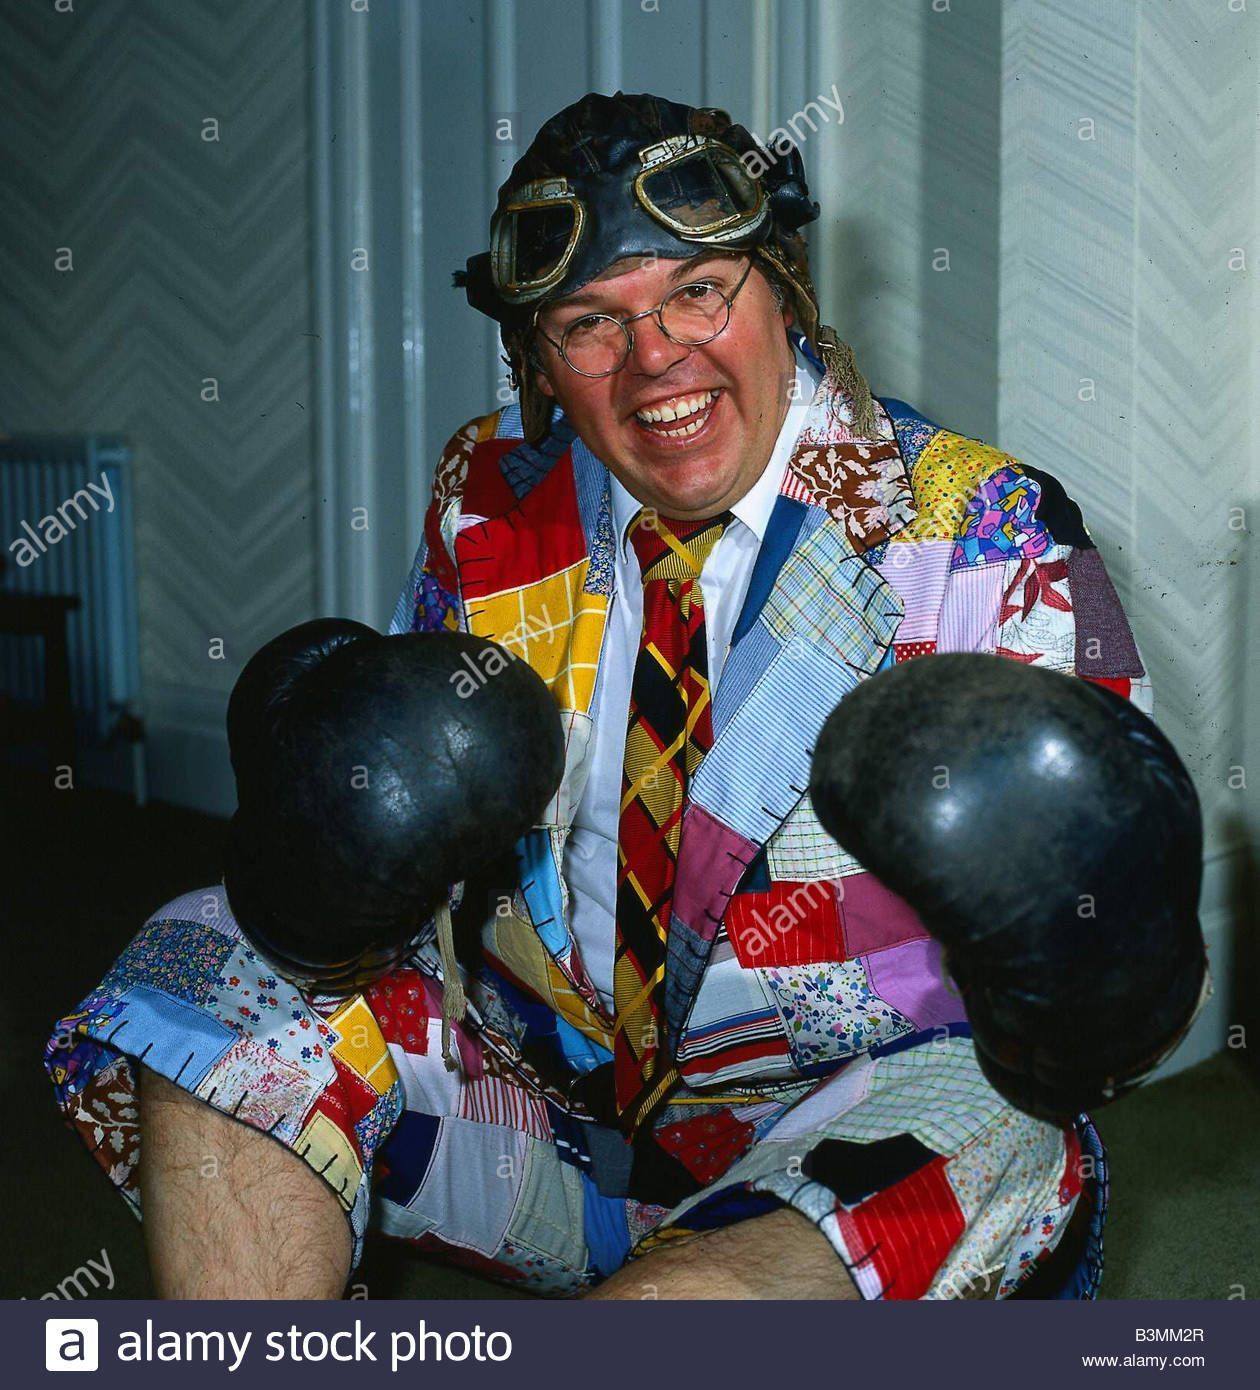 Bubbles reccomend Roy chubby brown costume